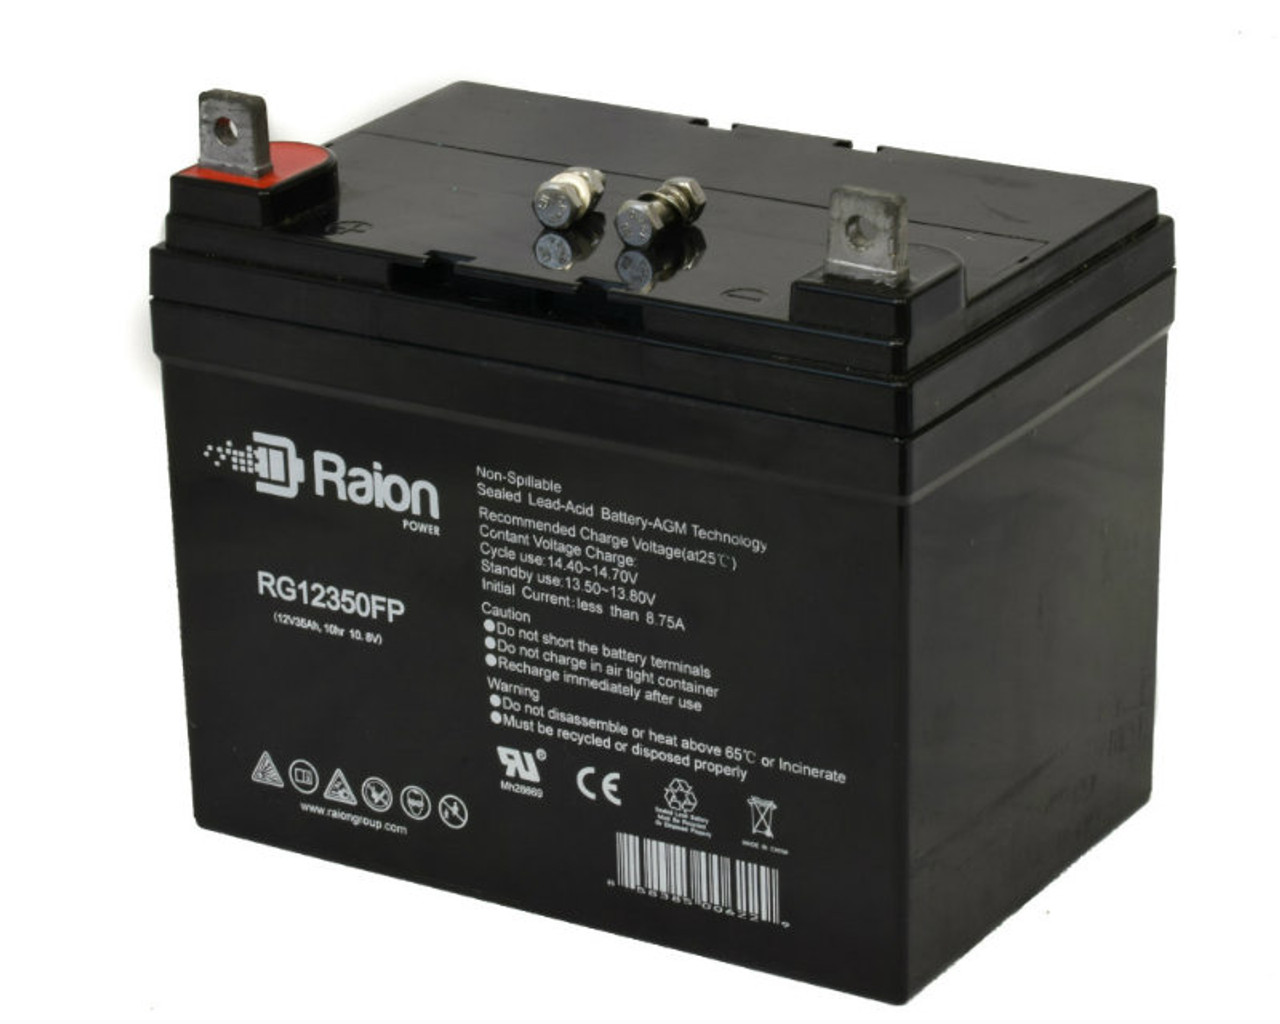 Raion Power Replacement 12V 35Ah RG12350FP Mobility Scooter Battery for Leisure Lift Pace Saver Scout